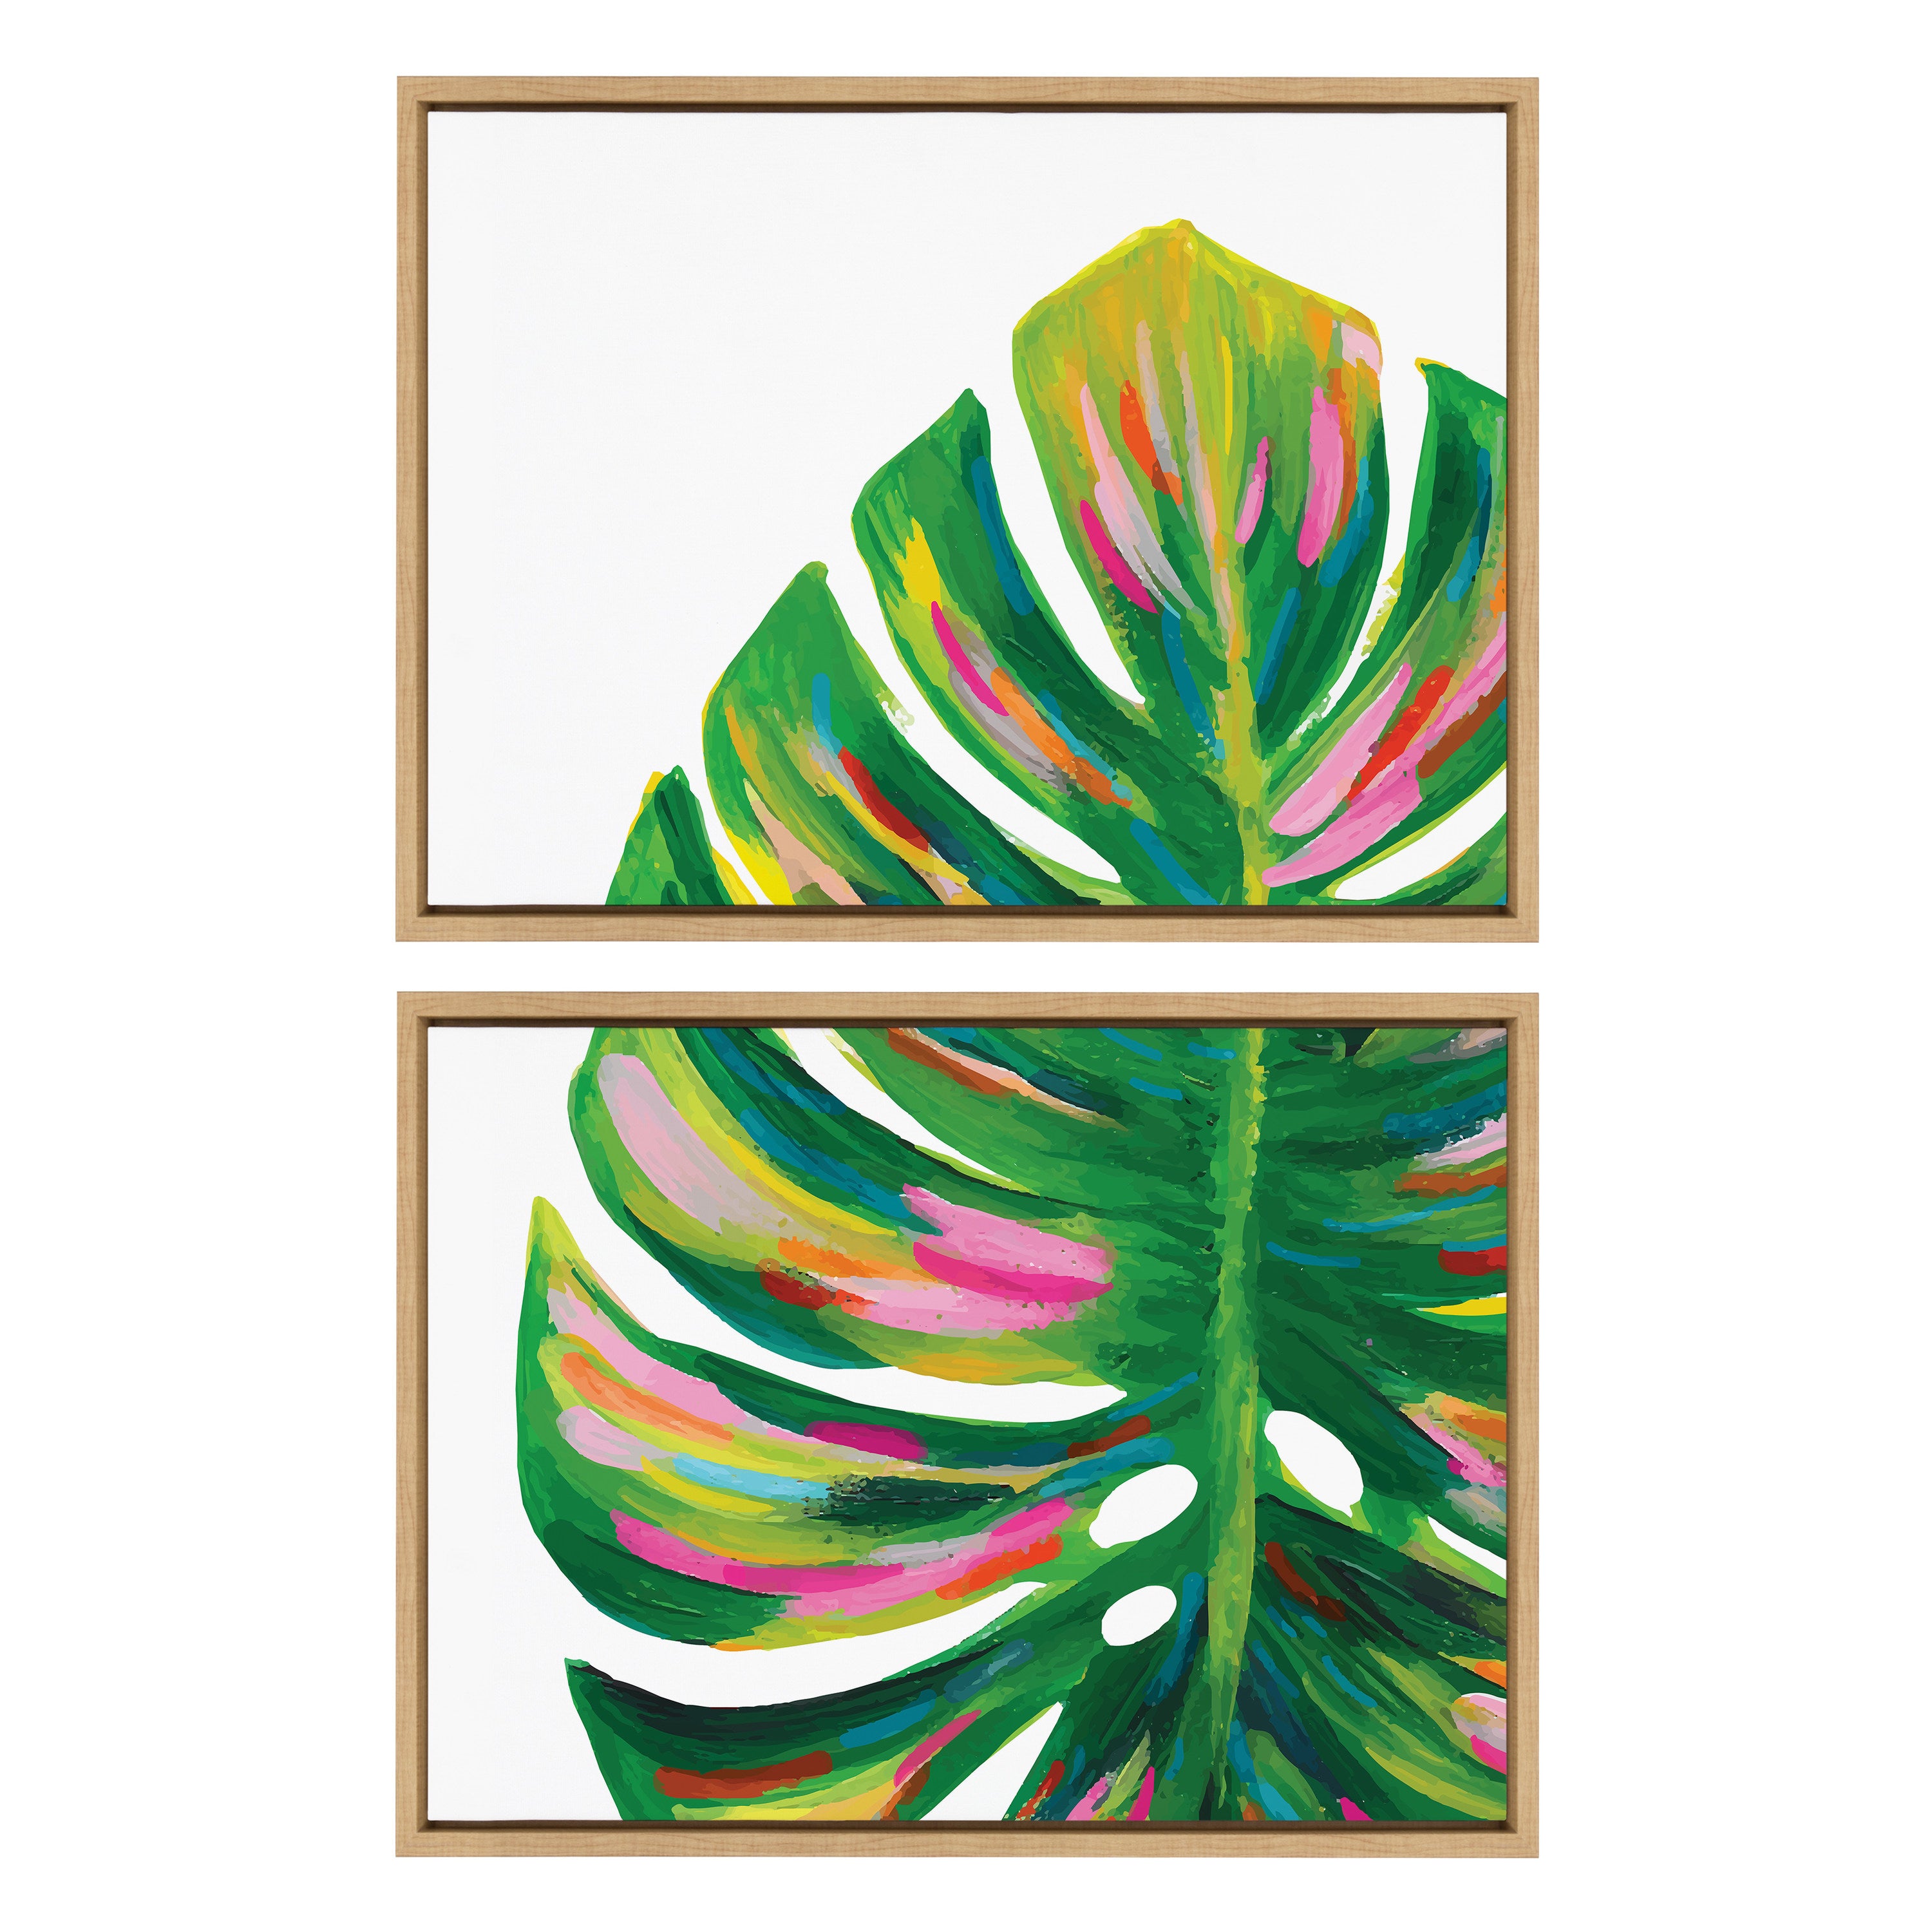 Sylvie Monstera 1 and 2 Framed Canvas Art Set by Jessi Raulet of Ettavee